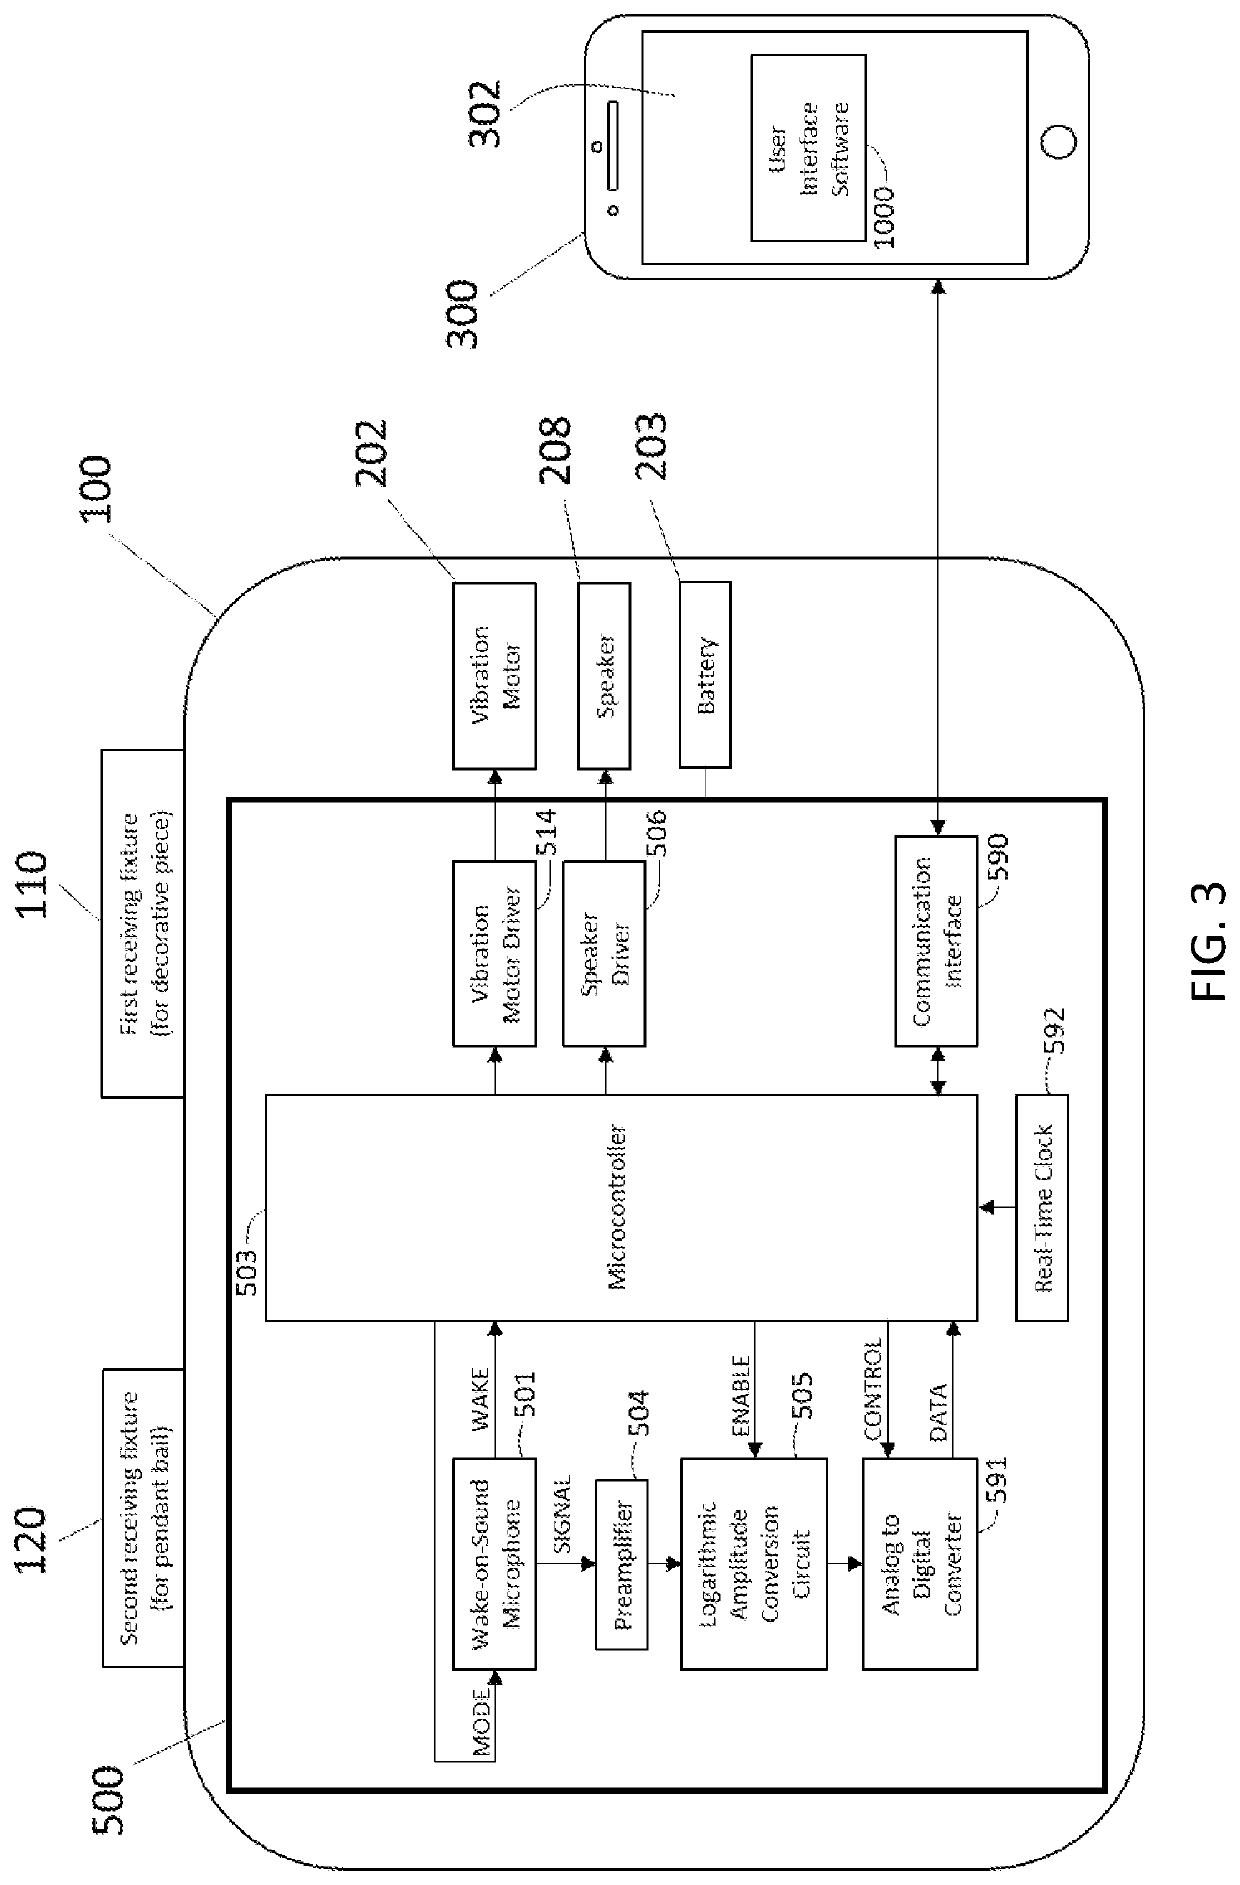 Voice monitoring system and method